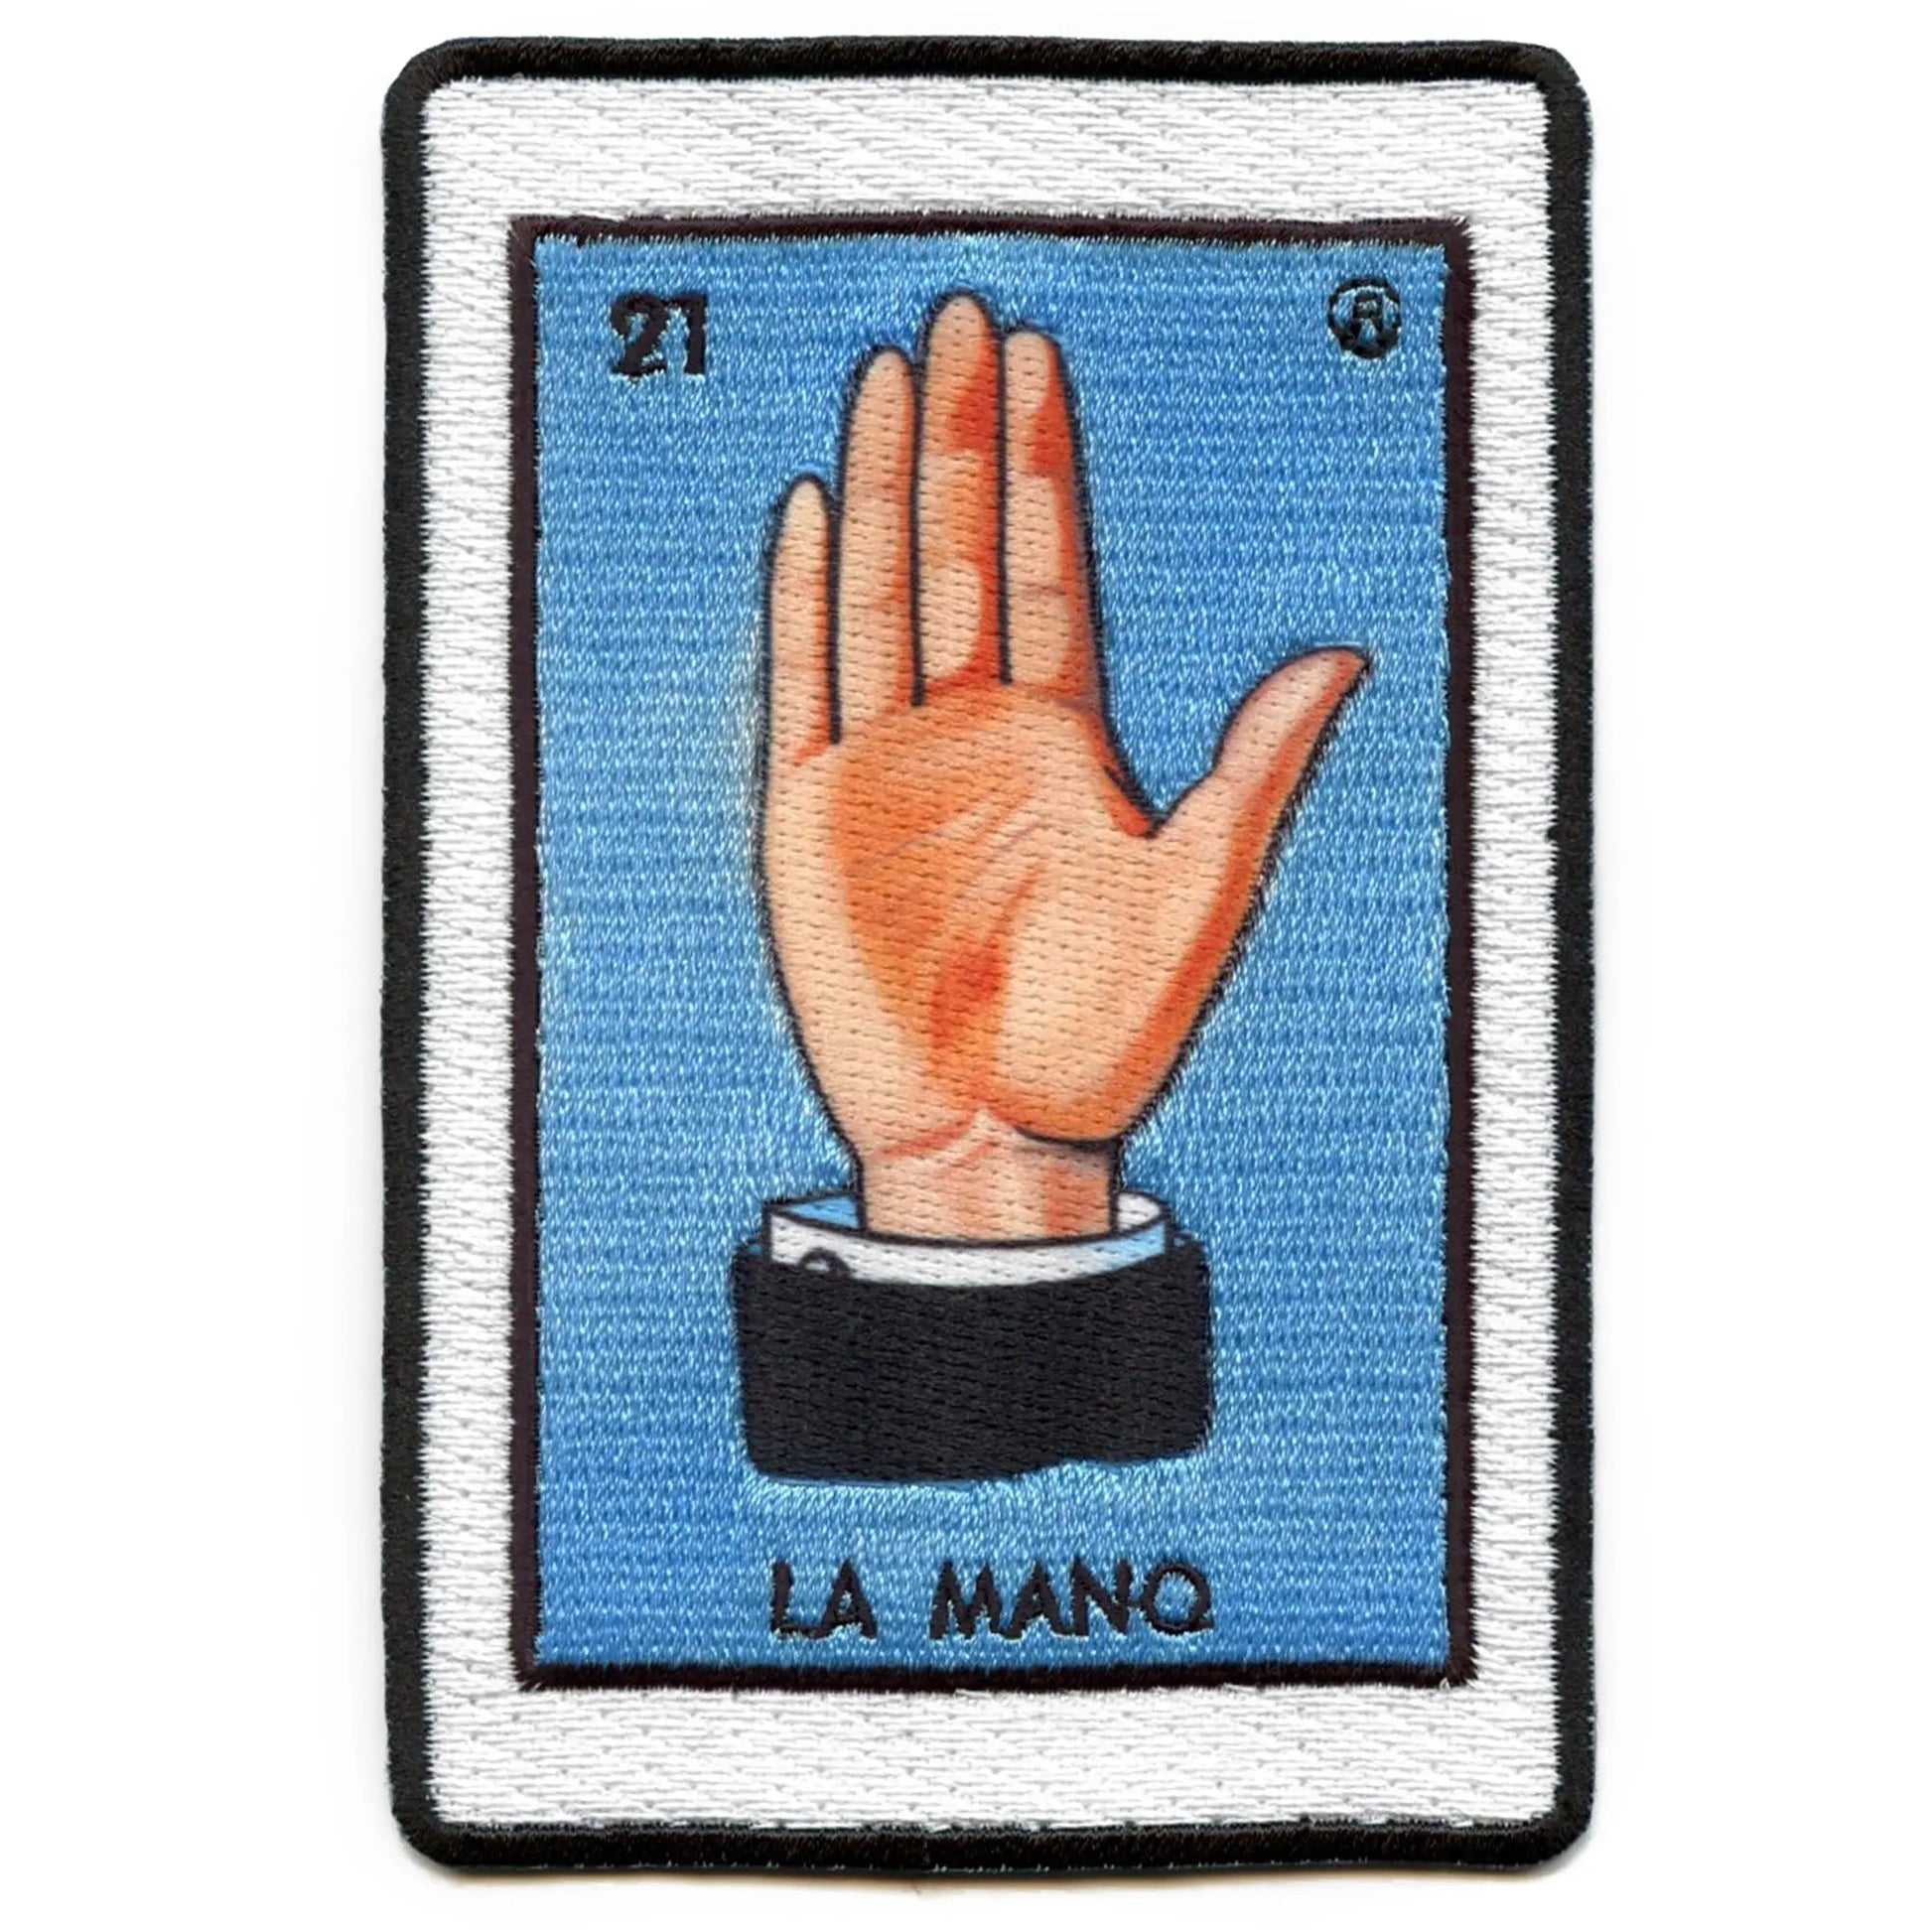 La Mano 21 Patch Mexican Loteria Card Sublimated Embroidery Iron On